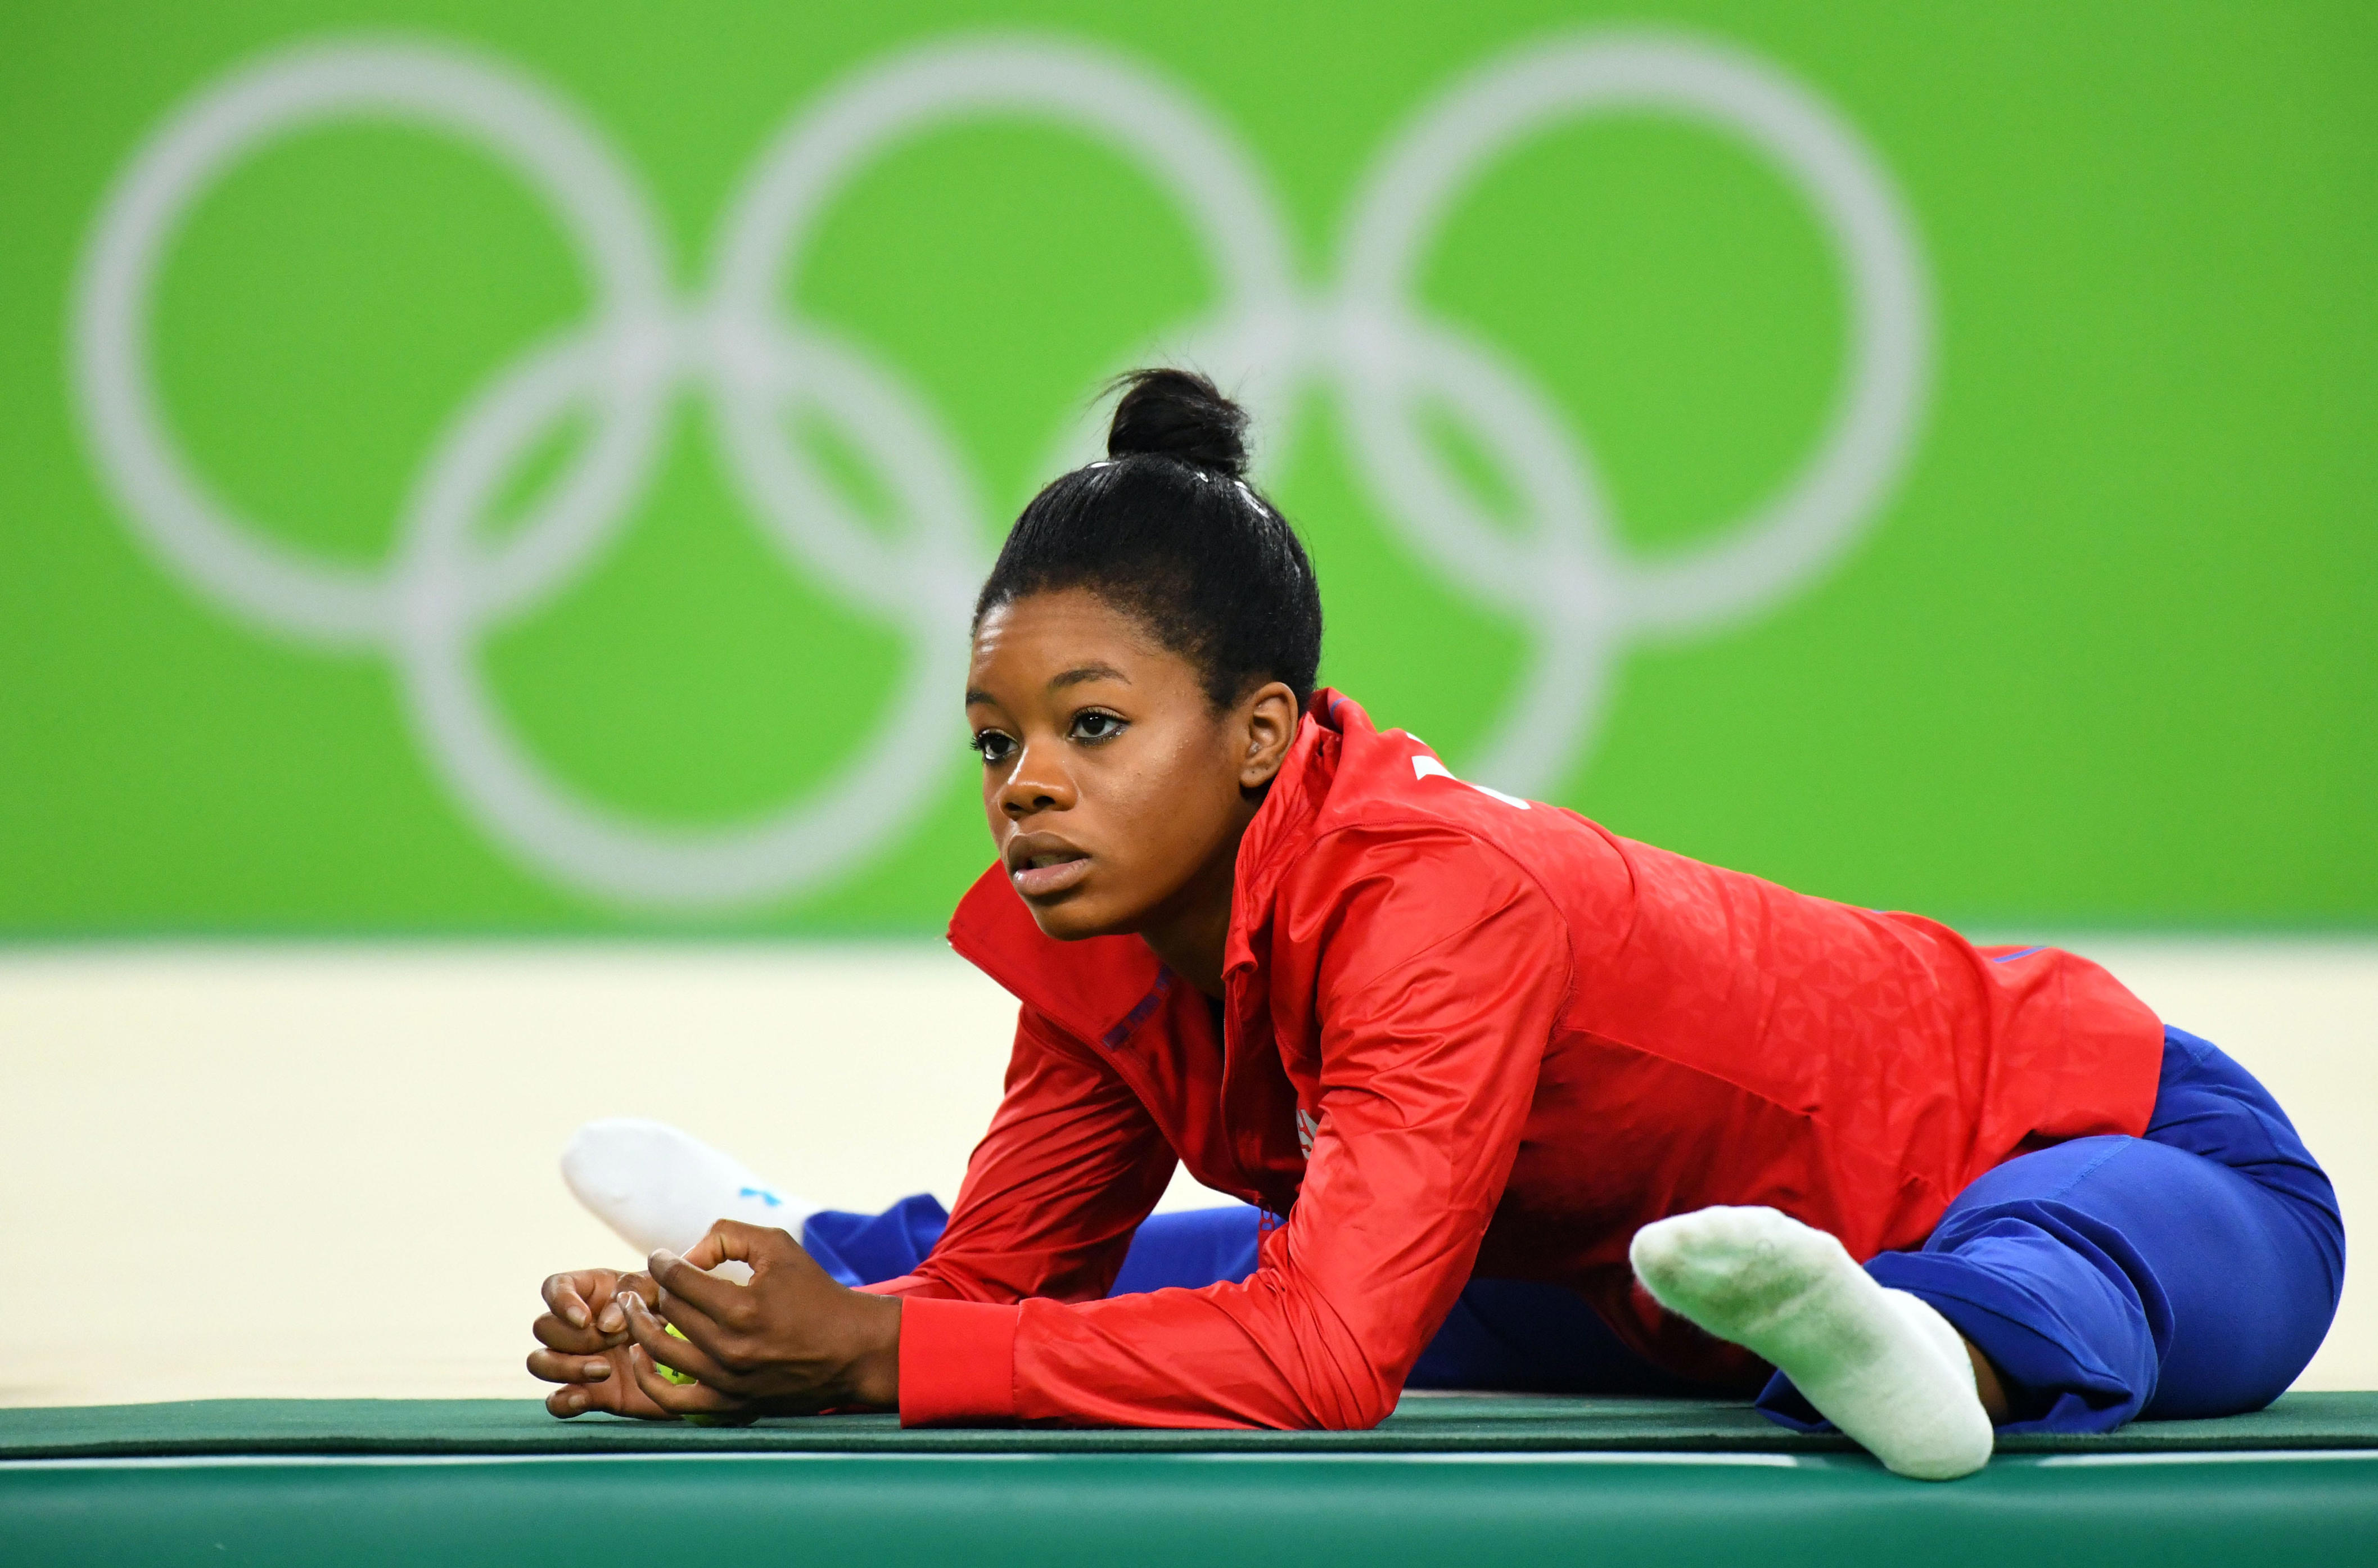 gabby douglas, who hasn't competed since rio olympics, out of winter cup with covid